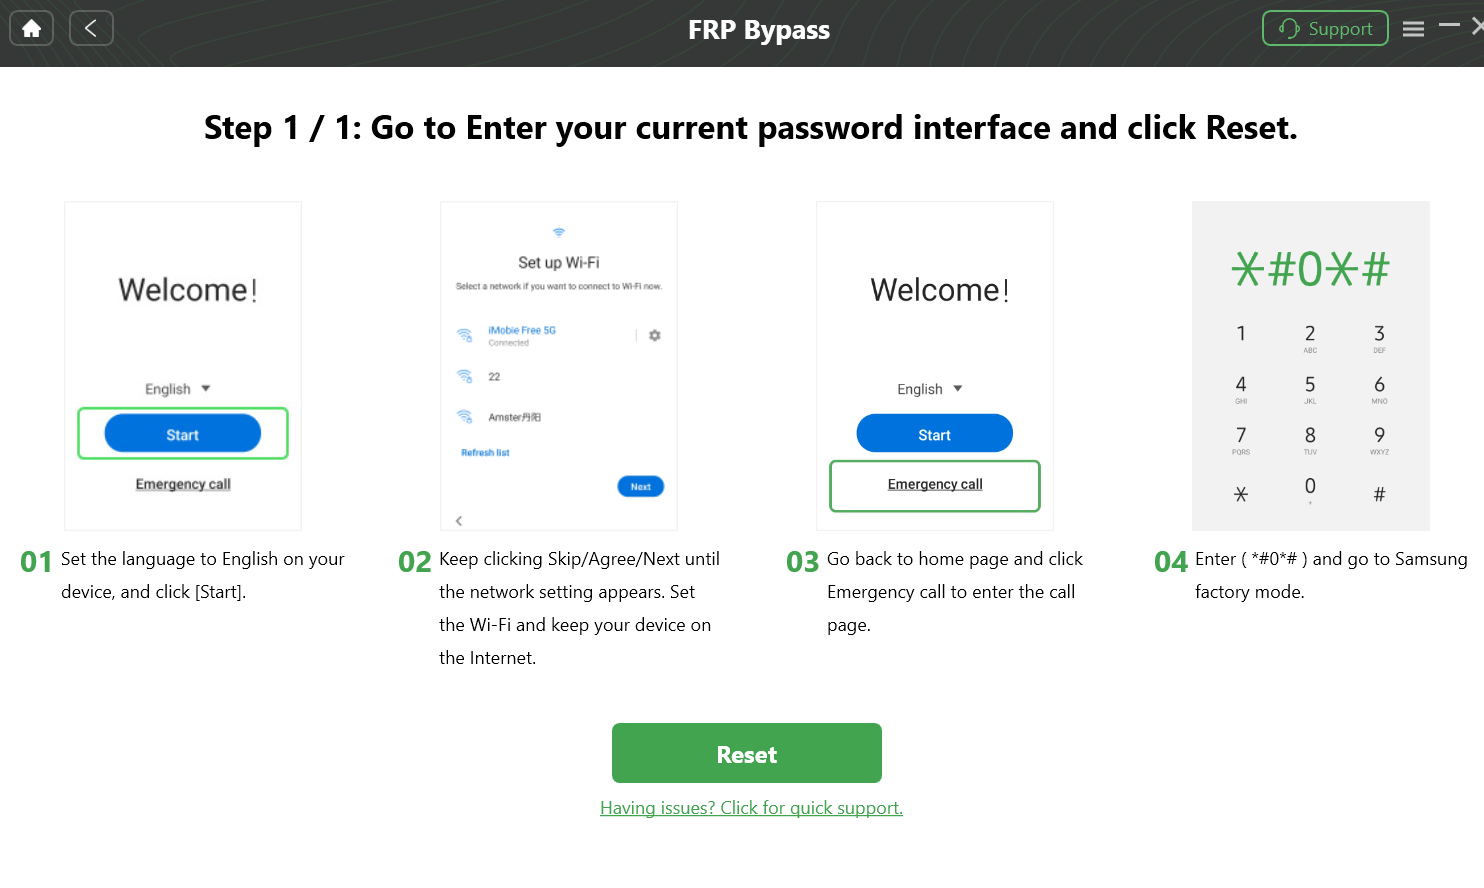 Go to Enter your Current Password Interface and Click Reset